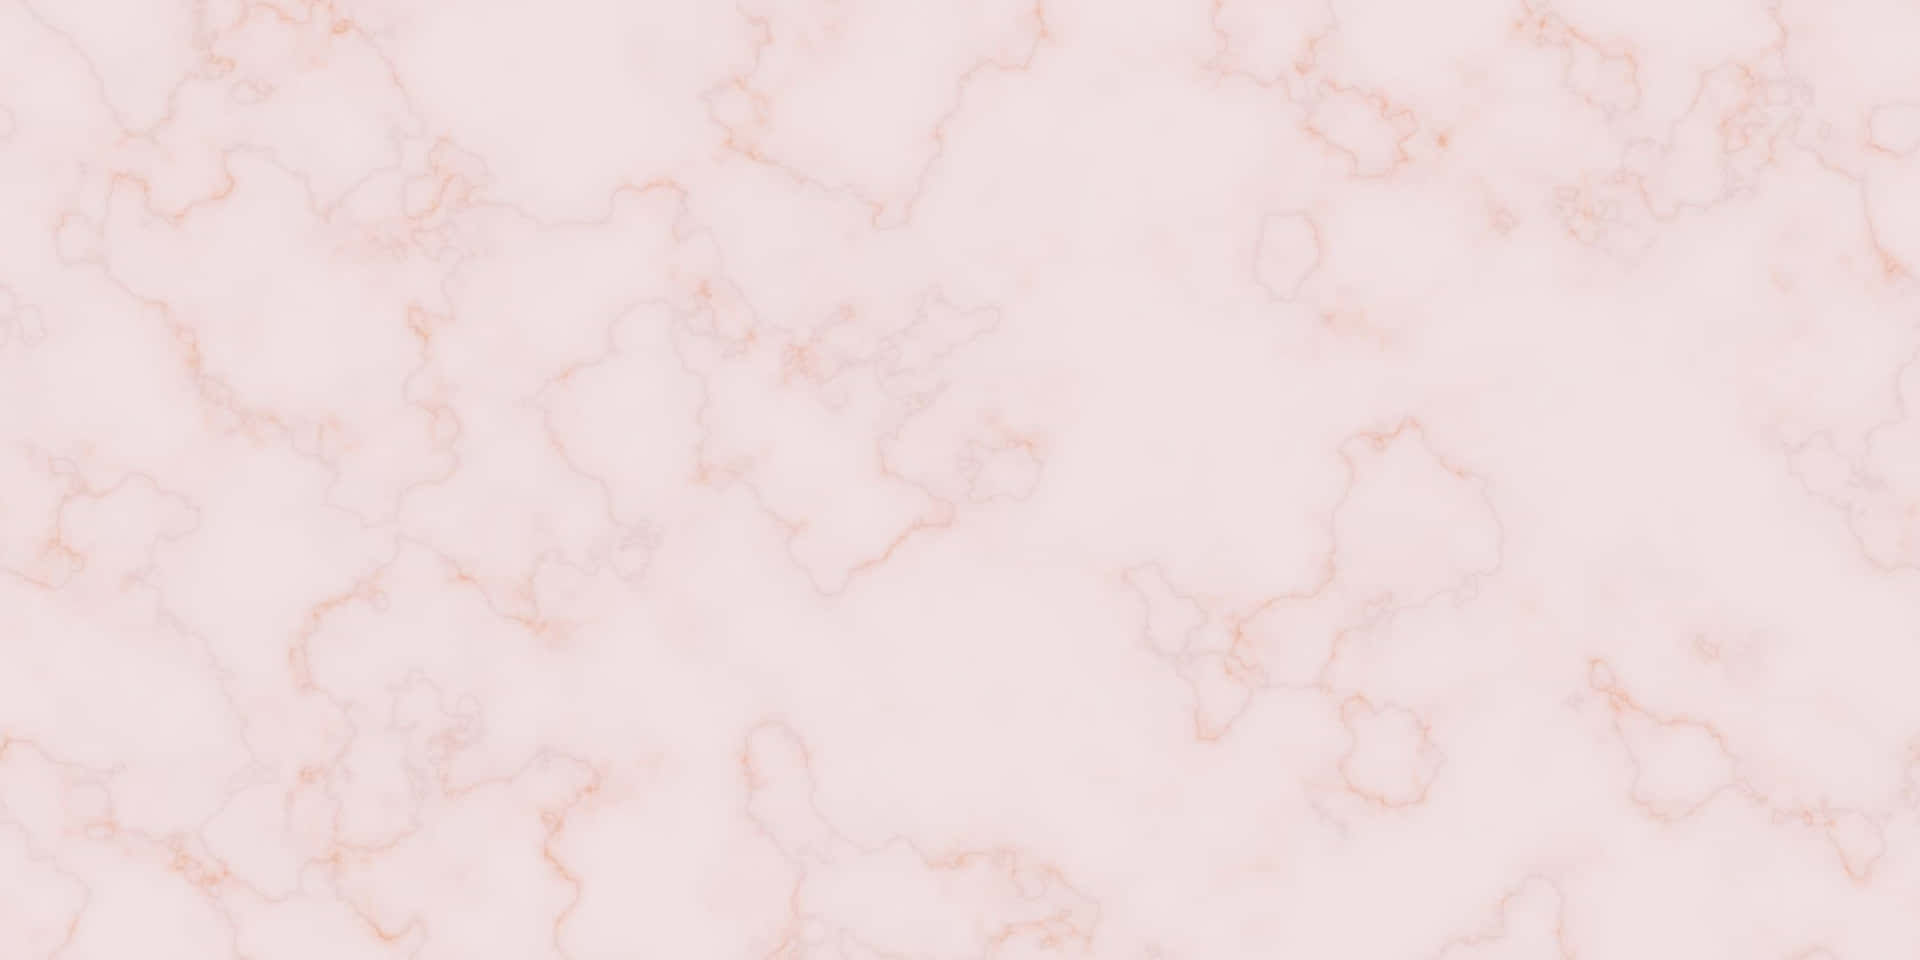 Widescreen Cream HD Marble Background